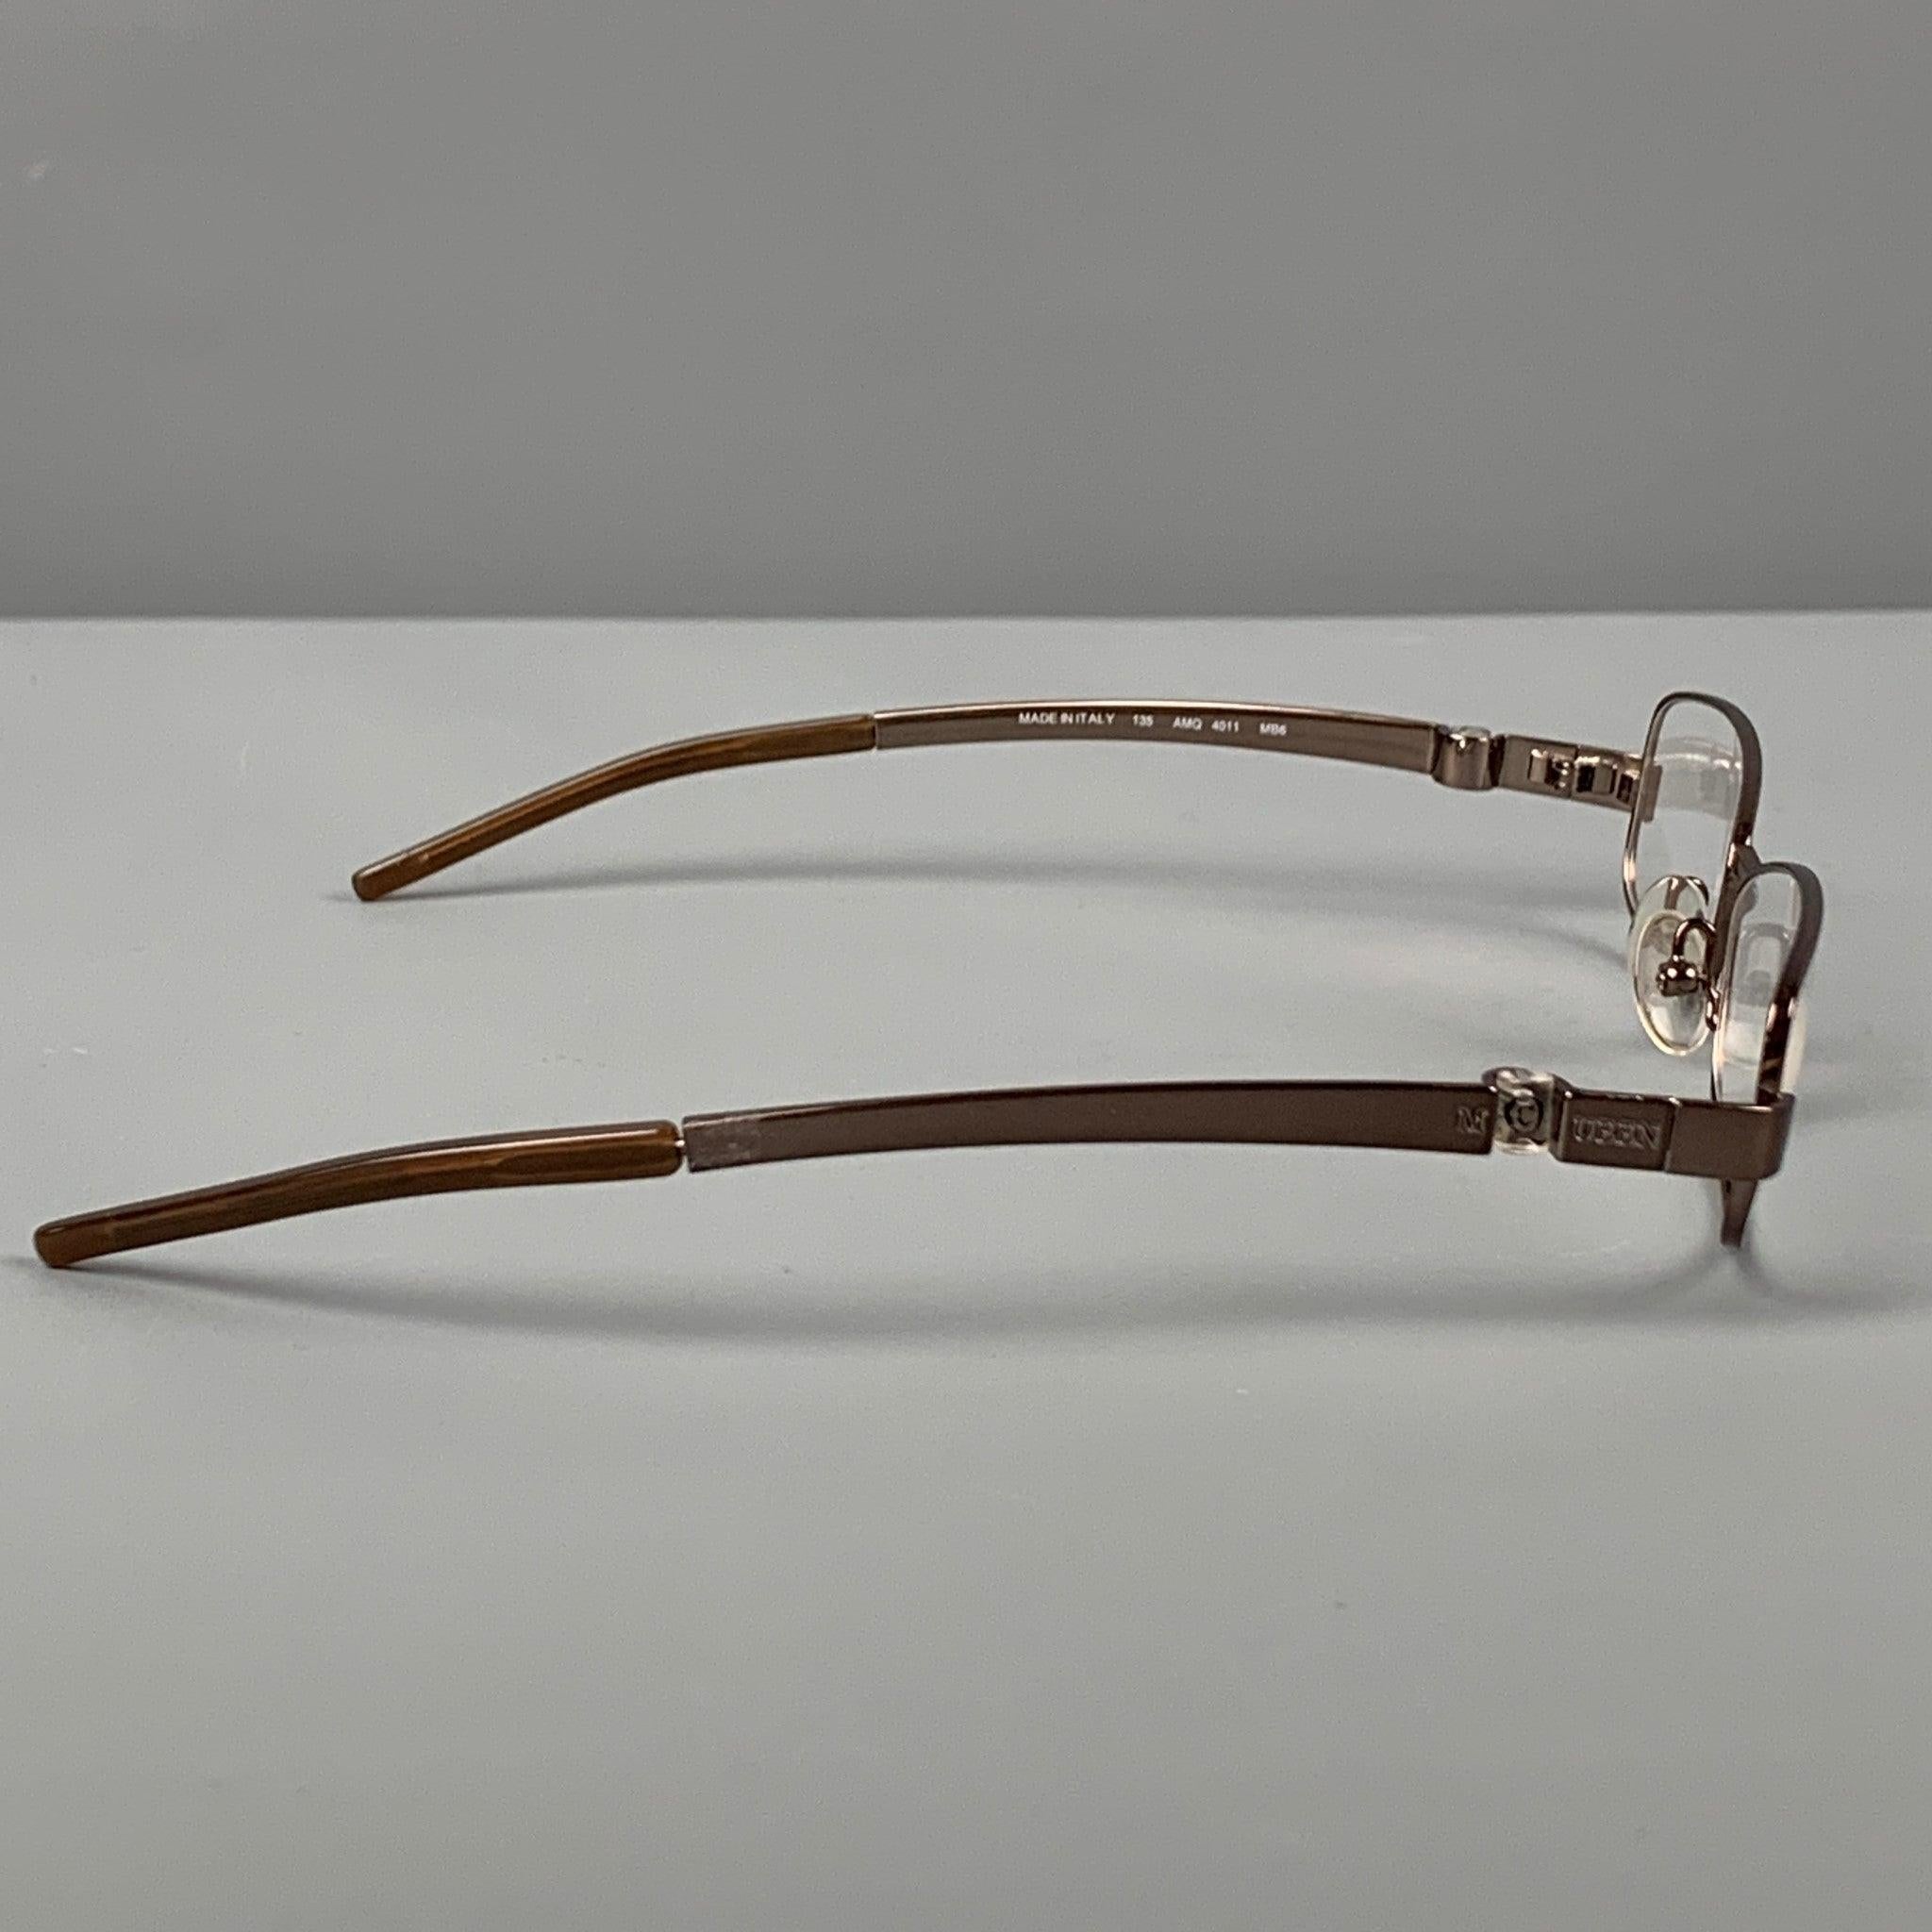 ALEXANDER McQUEEN eyewear comes in a copper metal and a prescription lenses. Includes case. Made in Italy.
Very Good
Pre-Owned Condition. 

Marked:   135 AMQ 4011 MB6
 

Measurements: 
  Length: 14 cm. Height: 3 cm.
  
  
 
Reference: